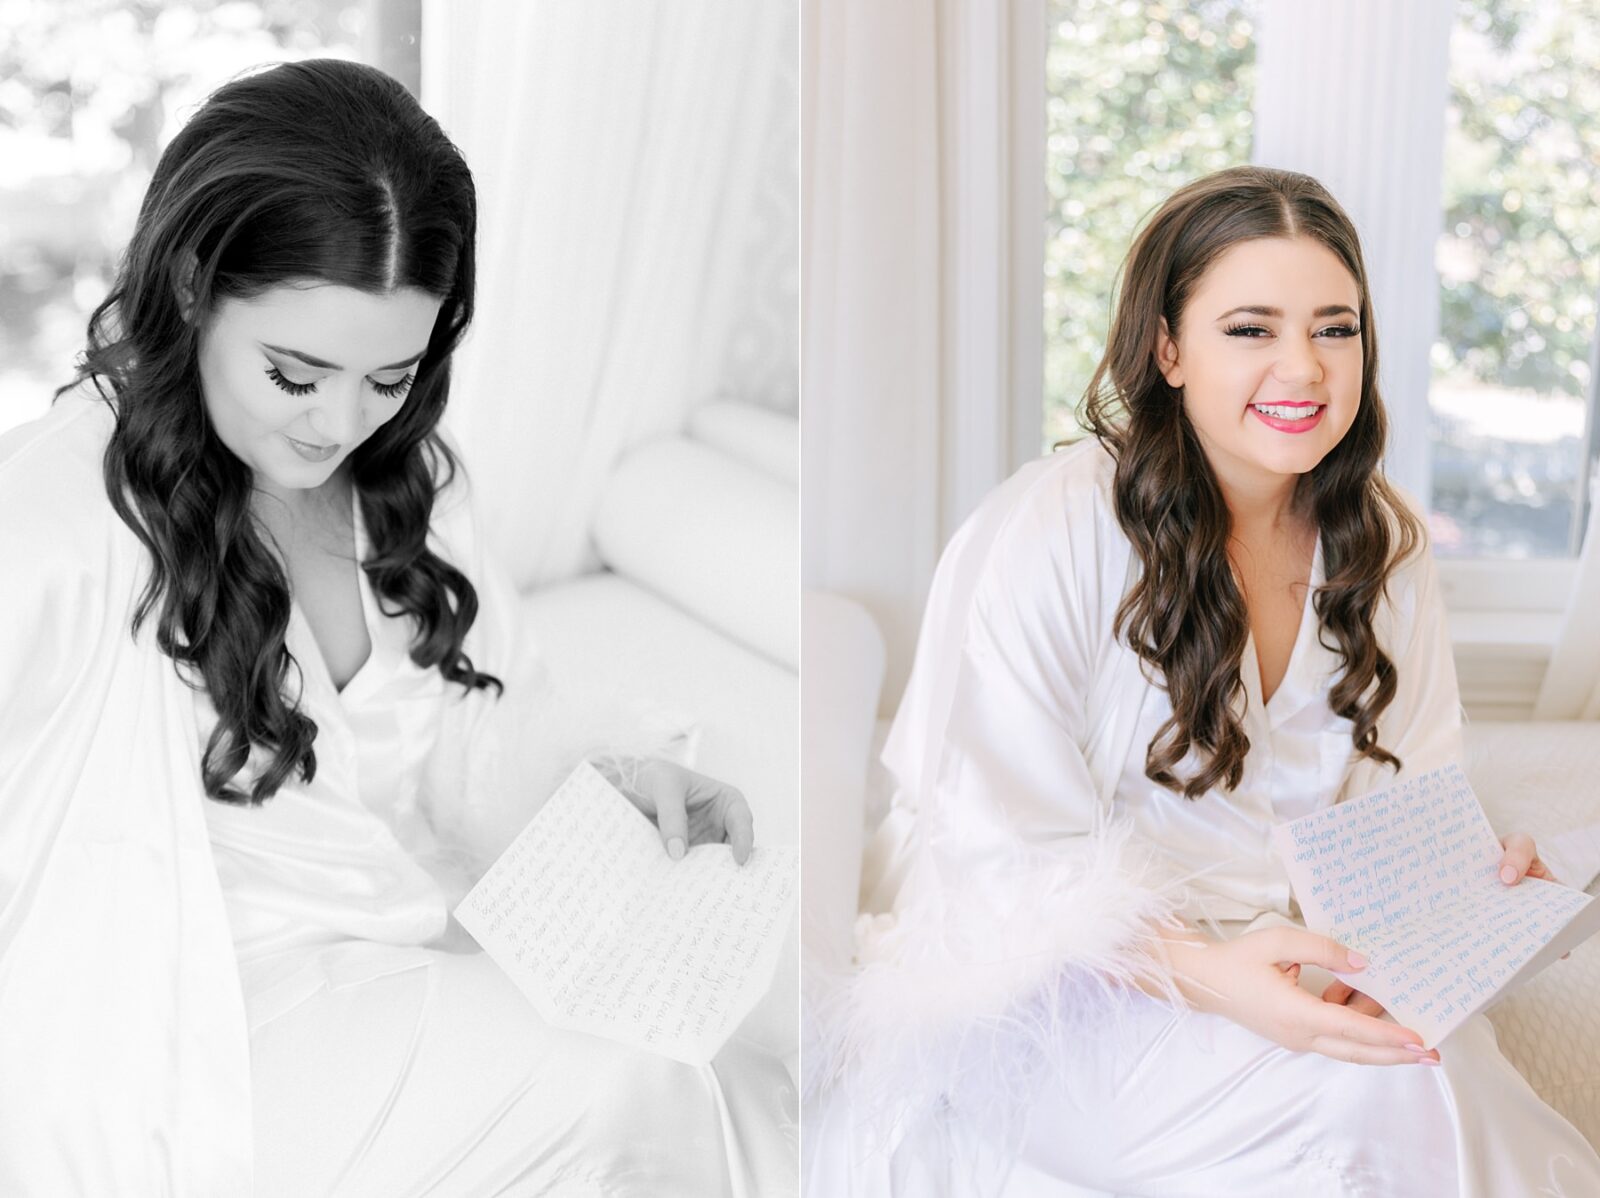 bride reading letter from groom, bride getting ready, bridal robe with fur, faux fur bride pajamas, barbie wedding makeup, wedding at Woodbine mansion wedding venue, photography by Tara Lyons Photography, The event shop wedding planner